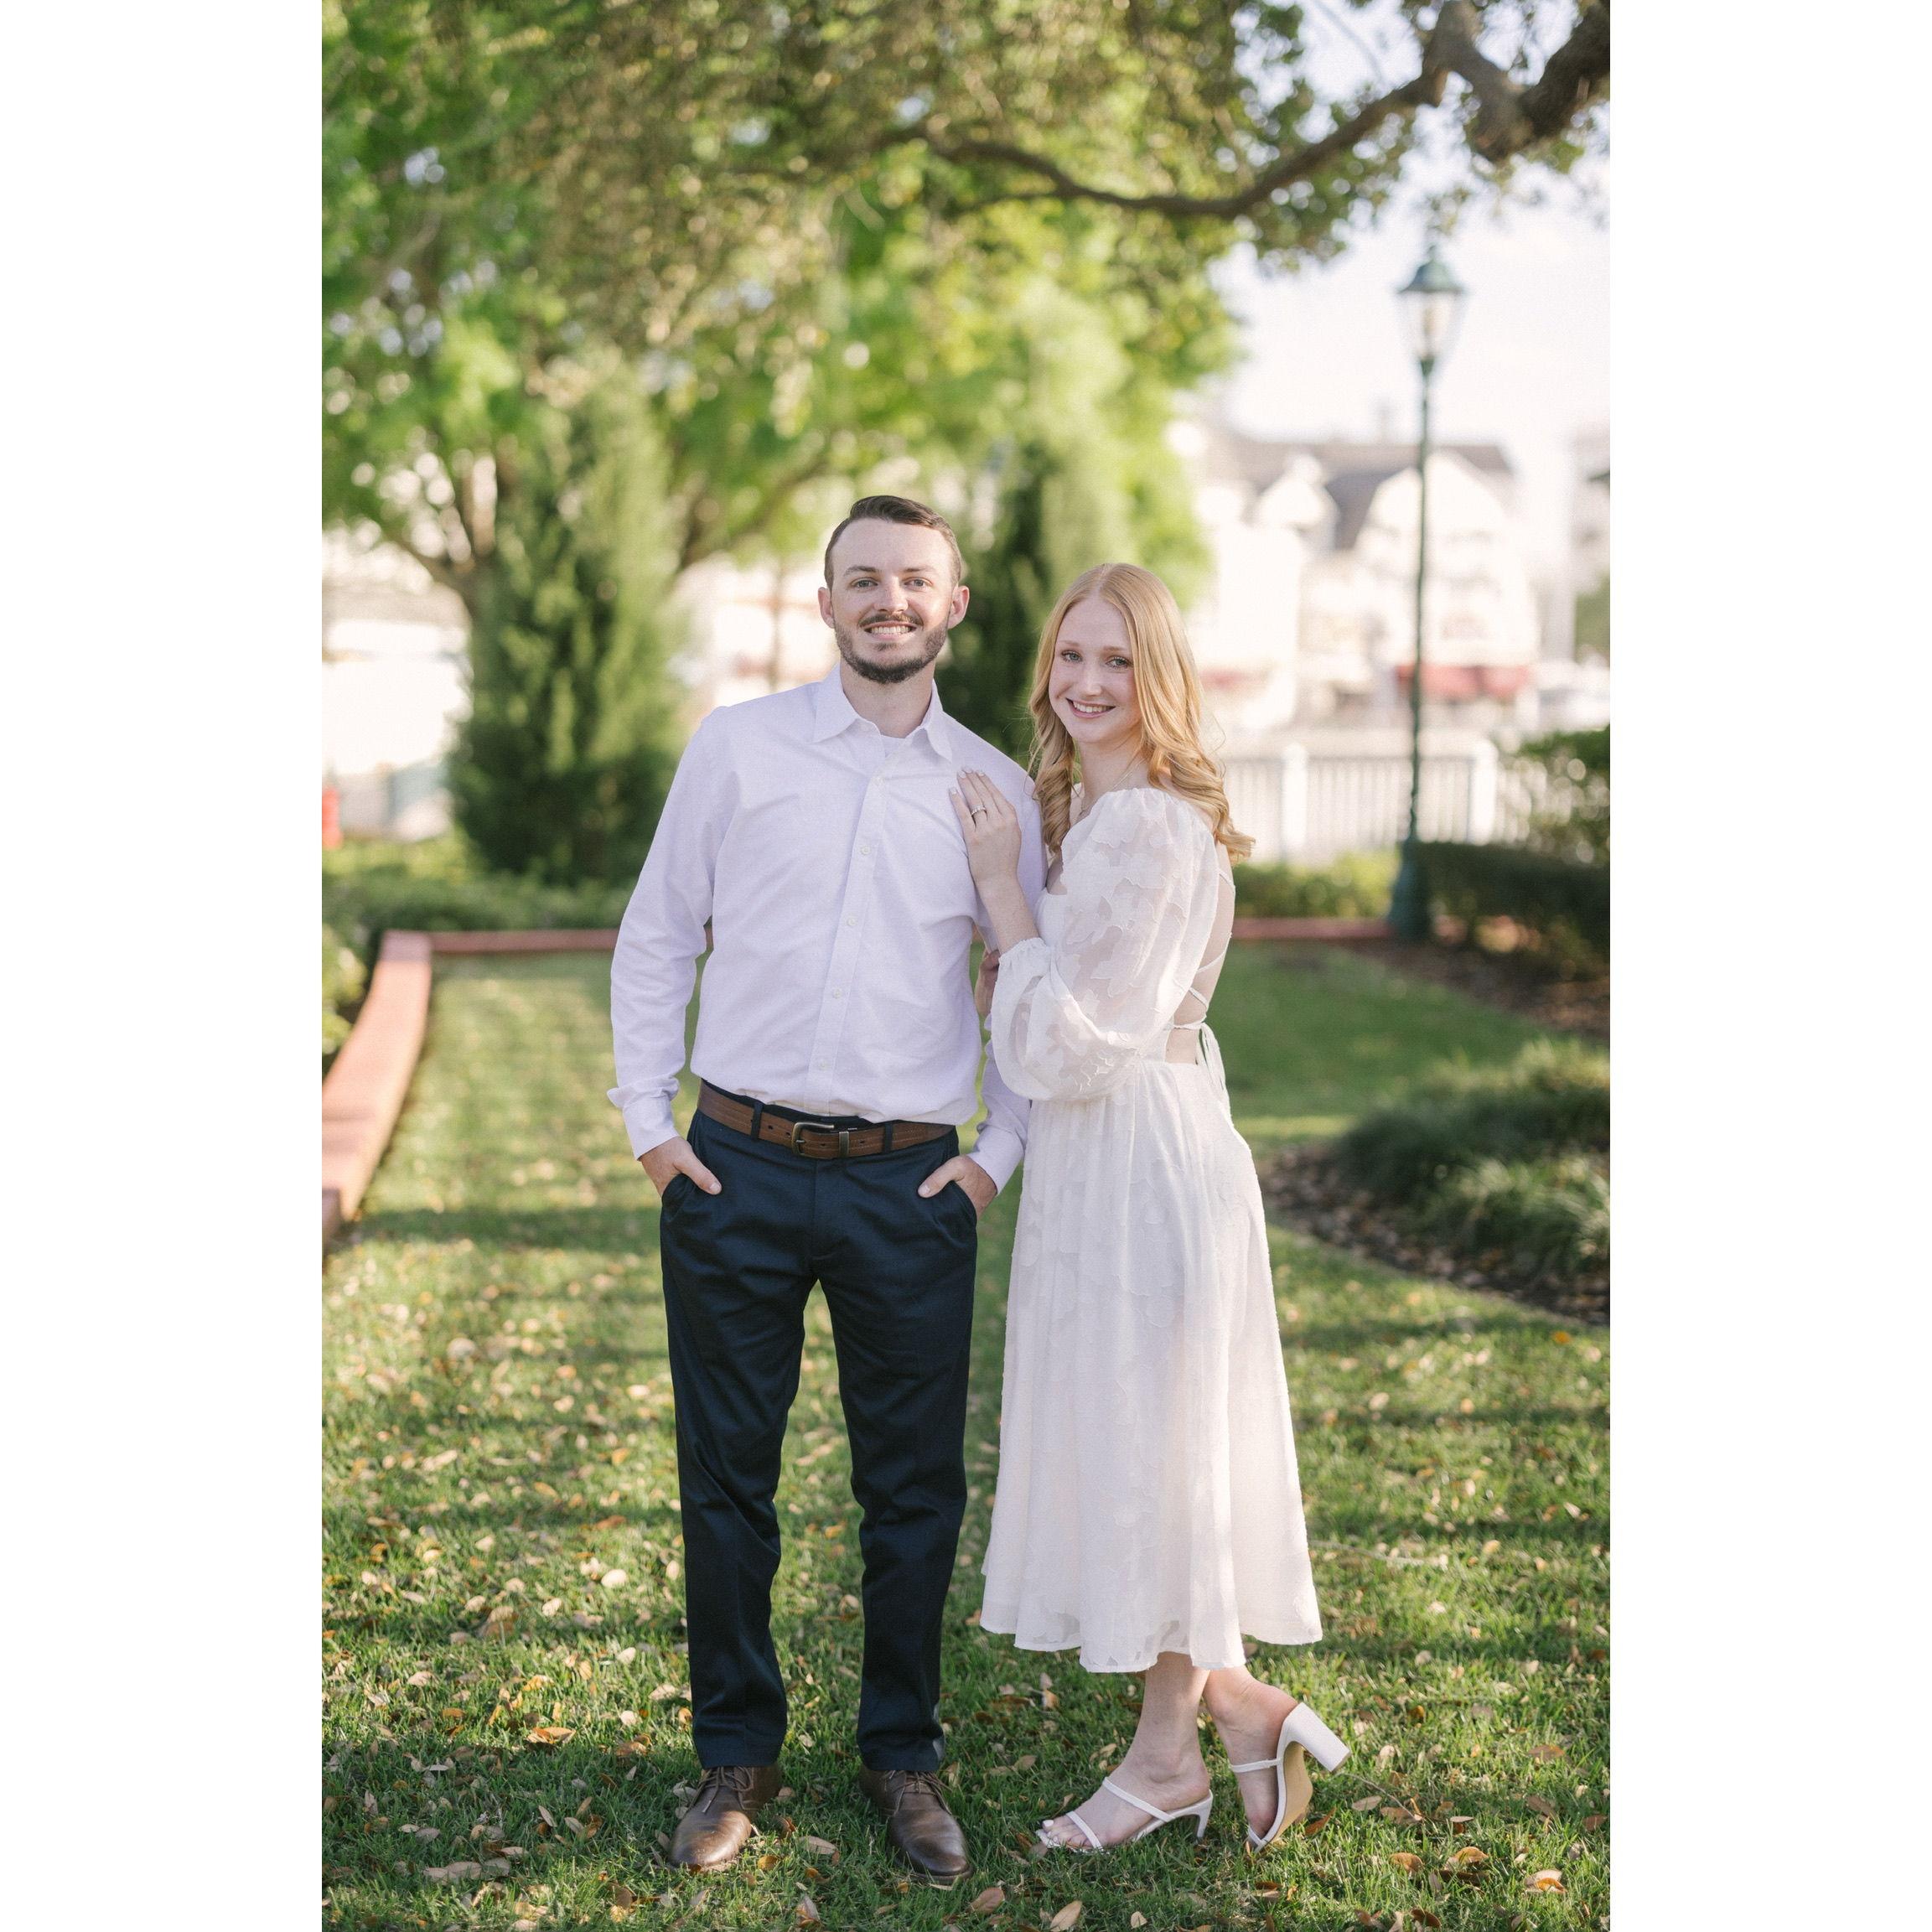 The Bride and Groom did their engagement photos at one of their favorite places, DISNEY!